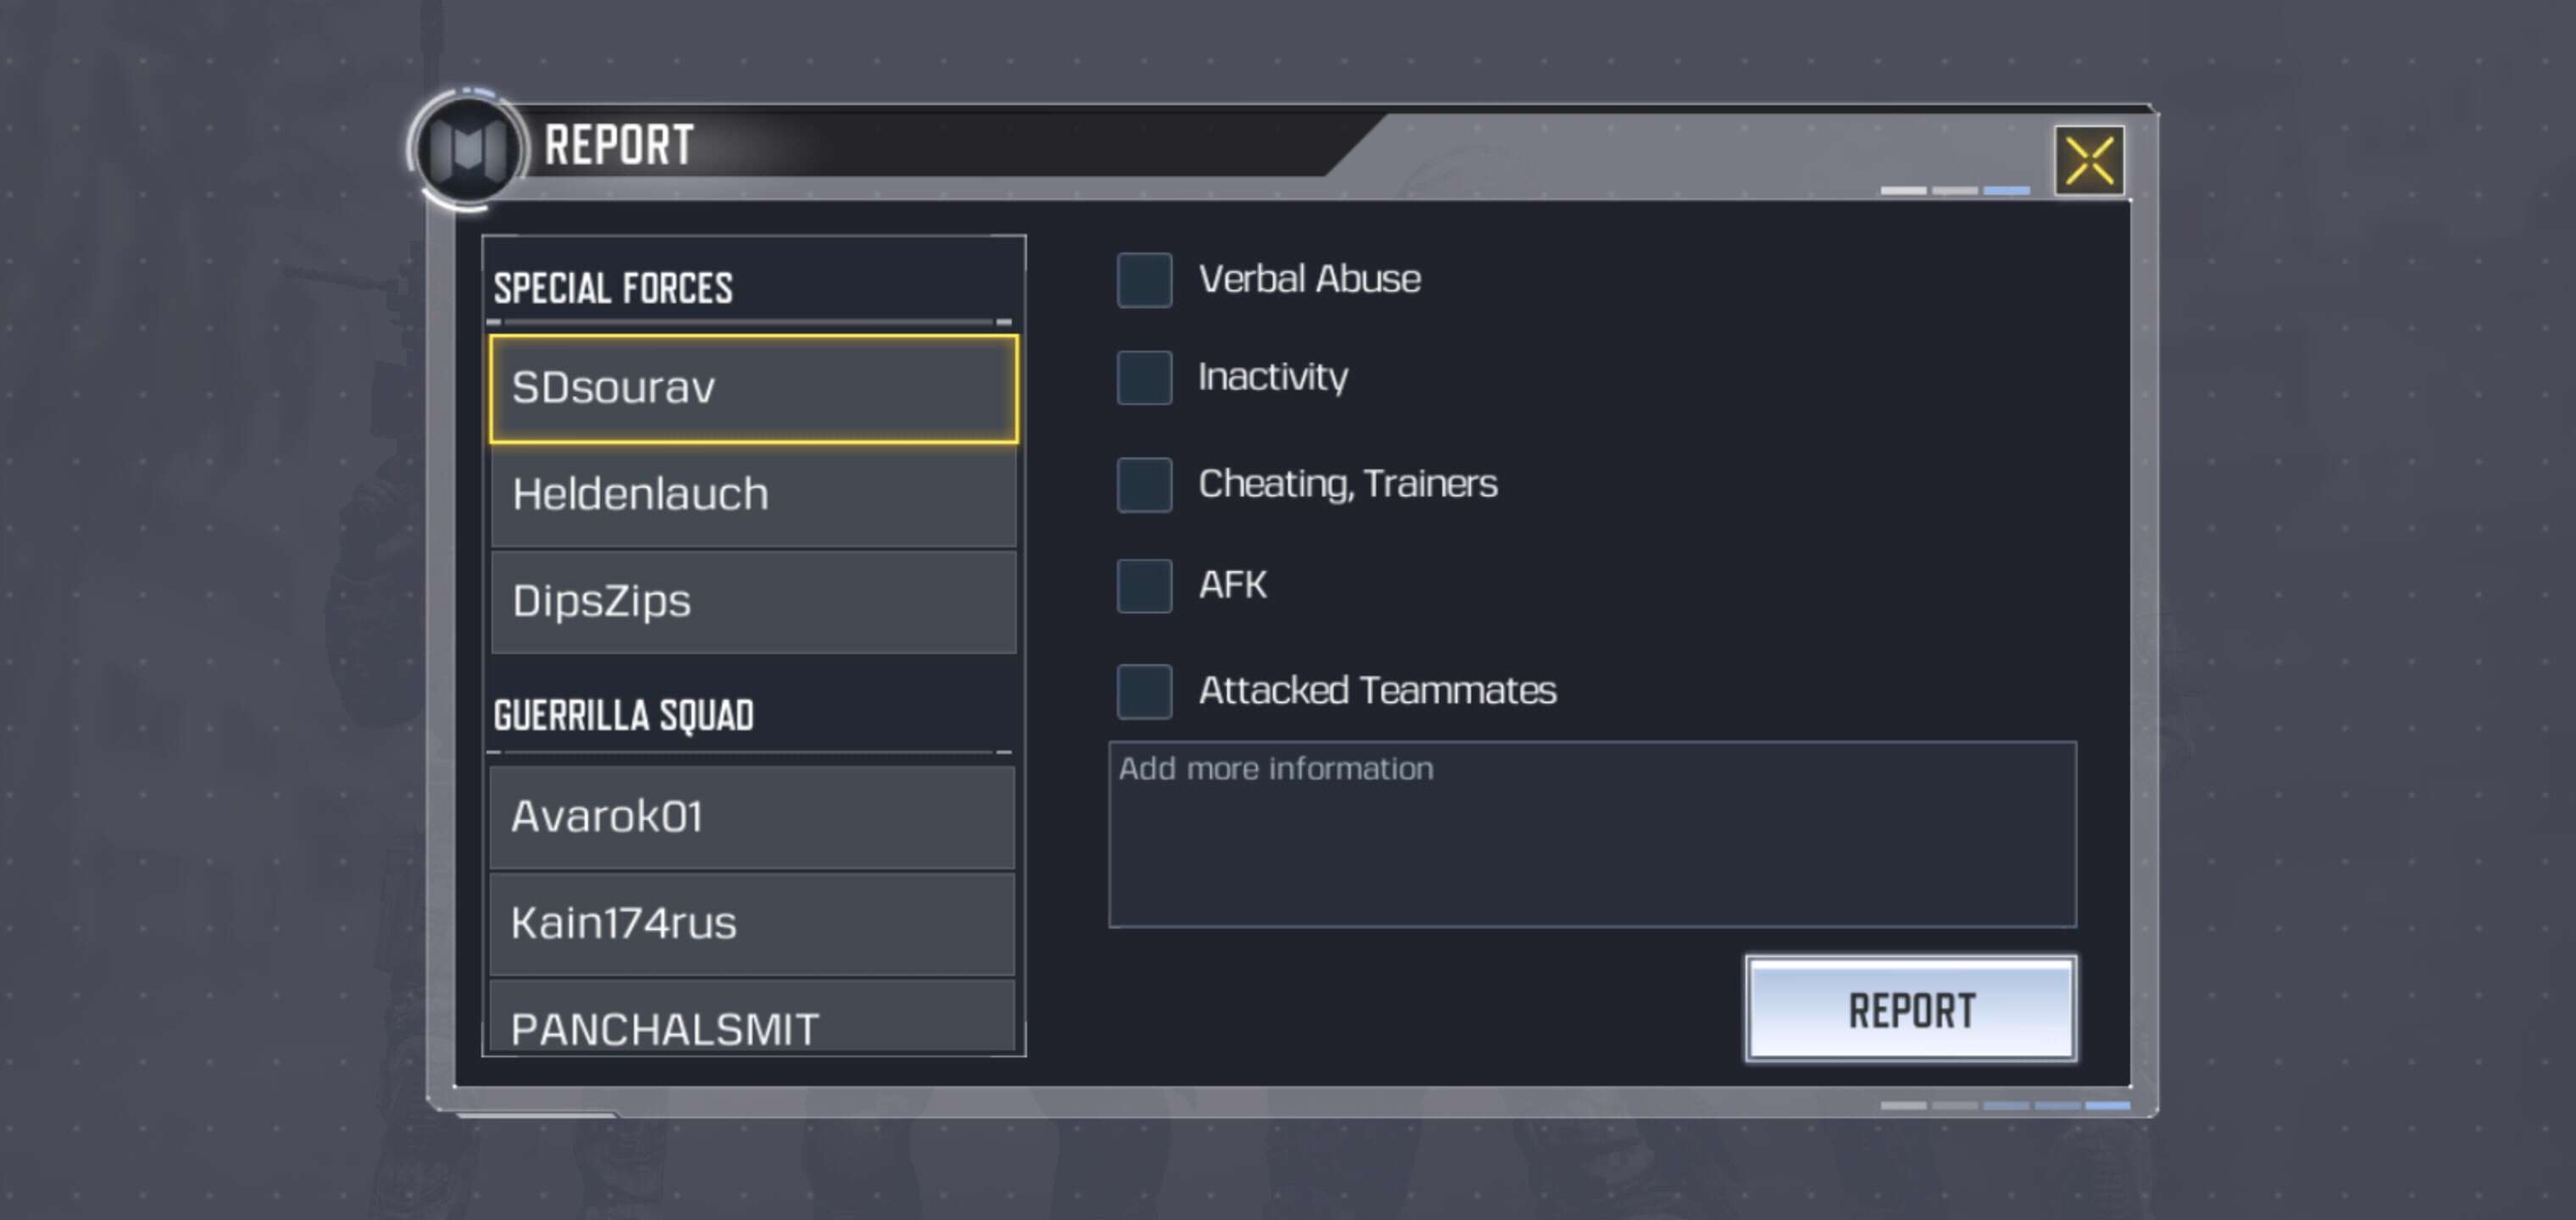 report hacker in Call of duty mobile: How to report a hacker ... - 